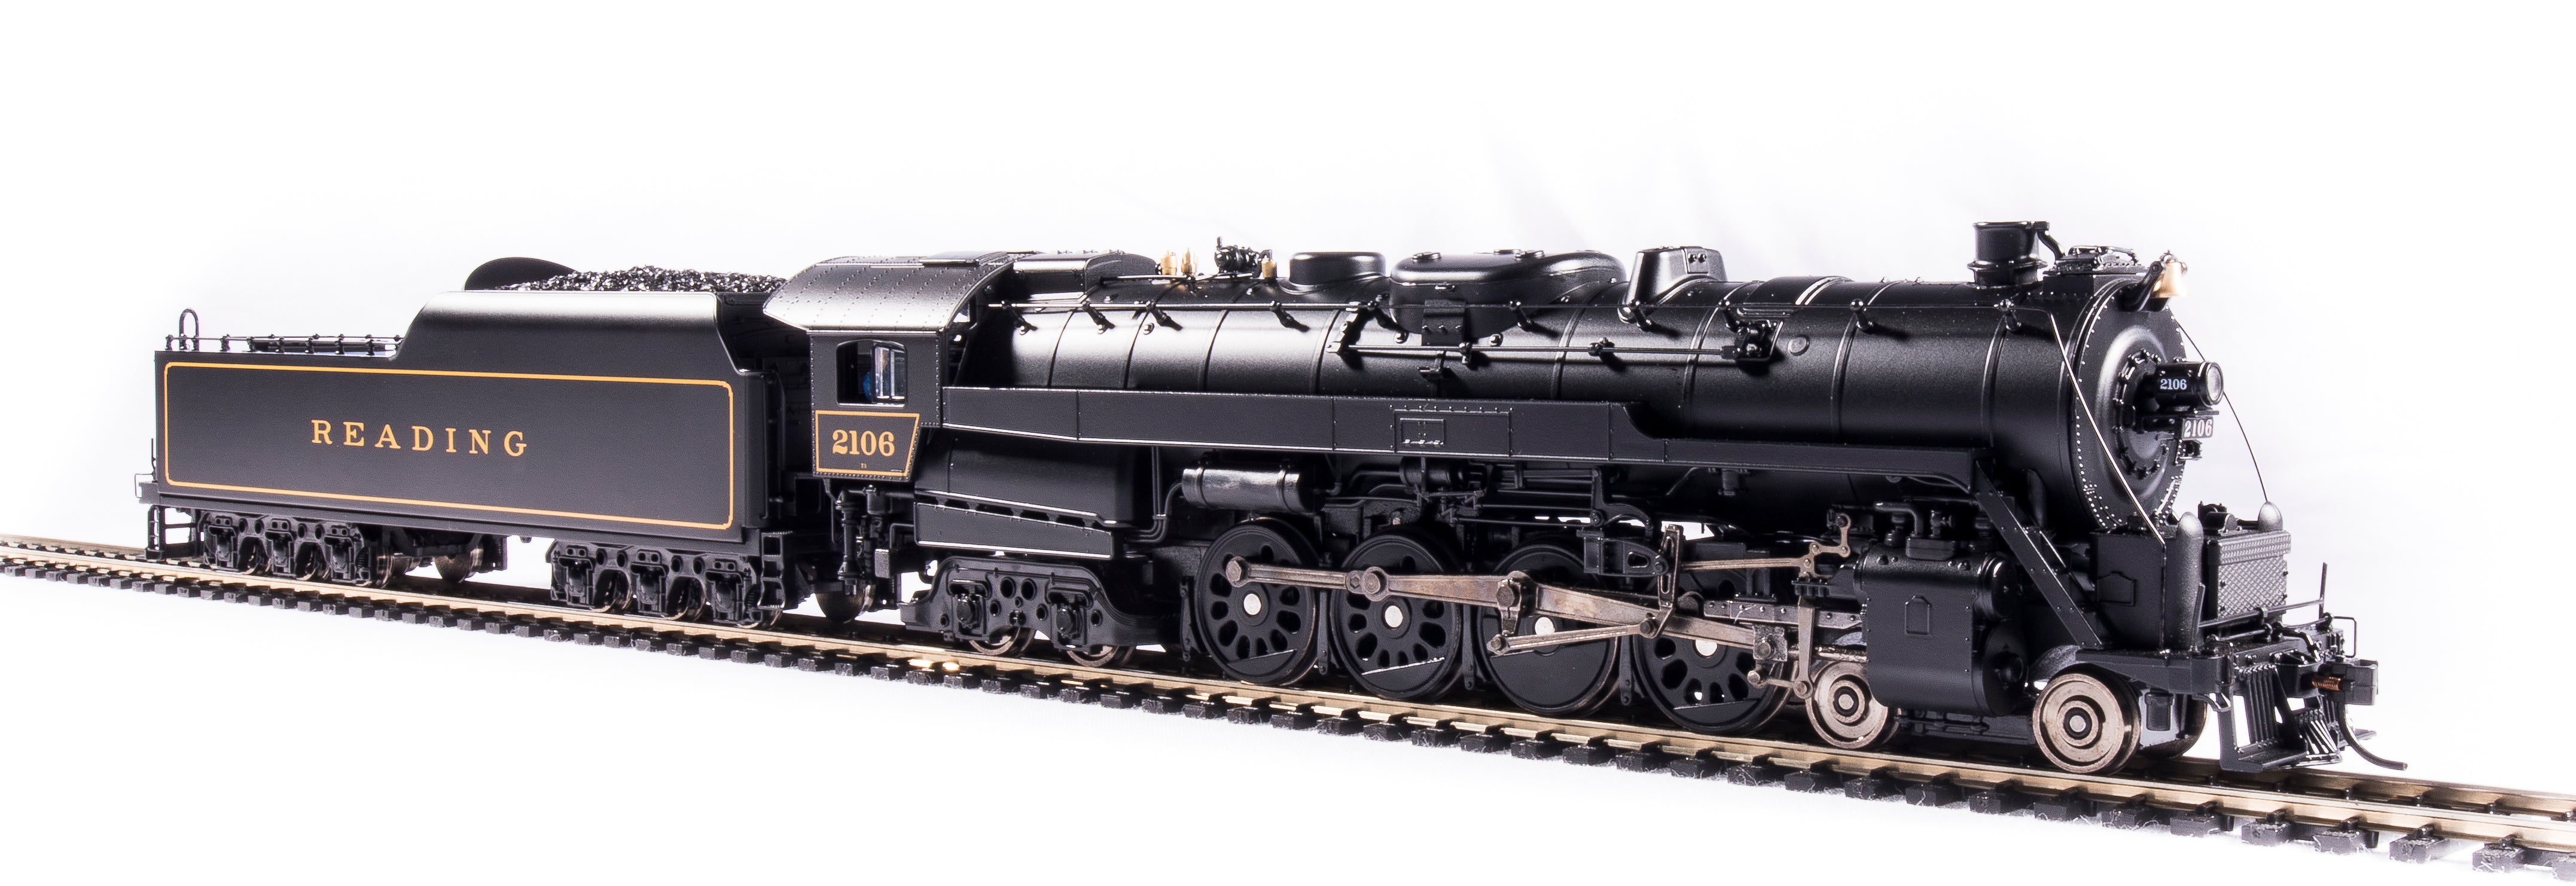 6802 Reading T1 4-8-4, In Service Version #2115, Paragon4 Sound/DC/DCC, Smoke, HO